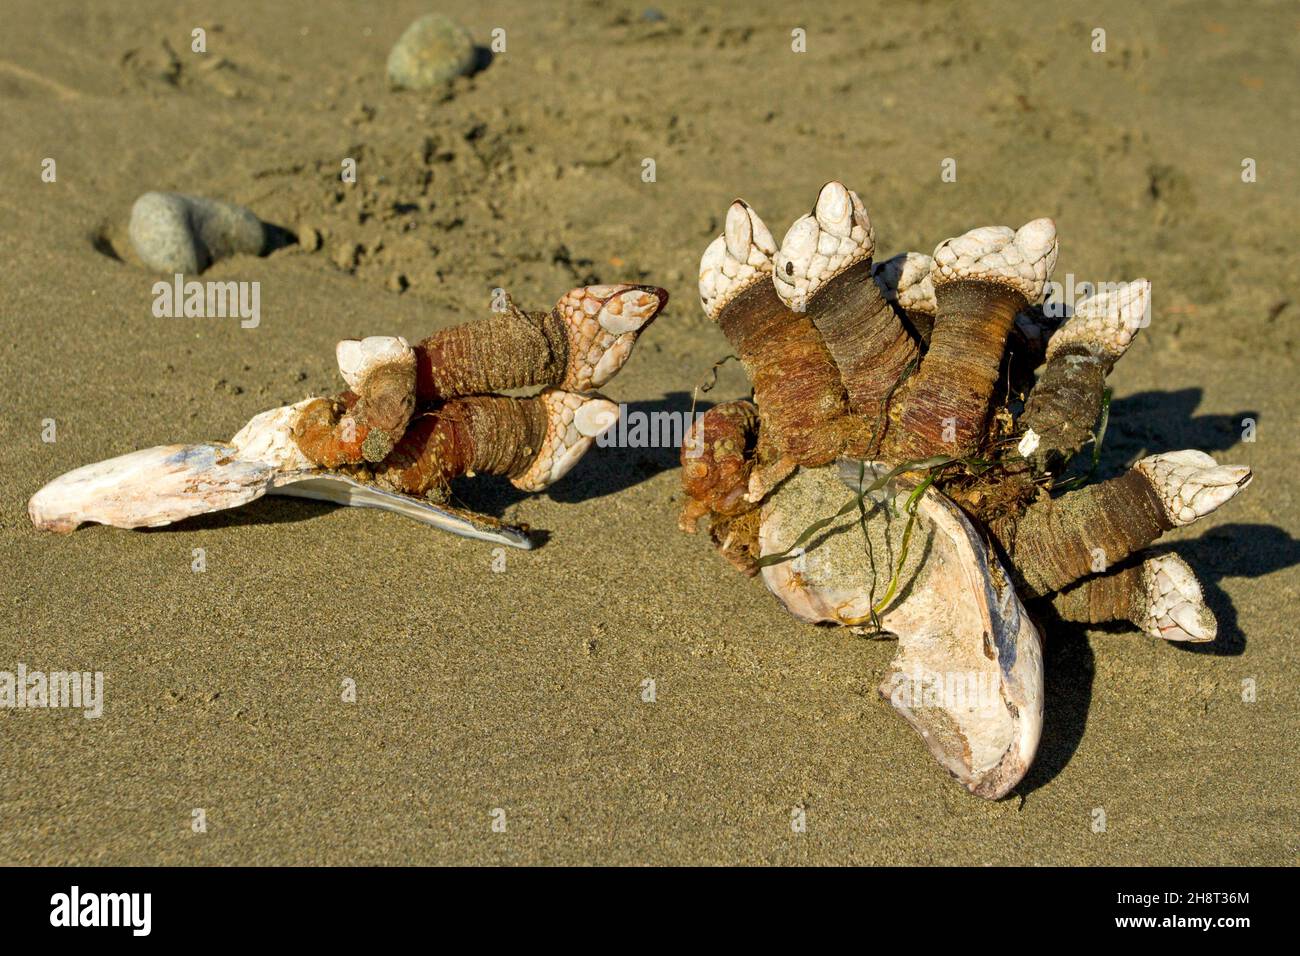 Gooseneck barnacles attached to shells on Wickaninnish beach, west coast Vancouver Island, BC, Canada in October Stock Photo